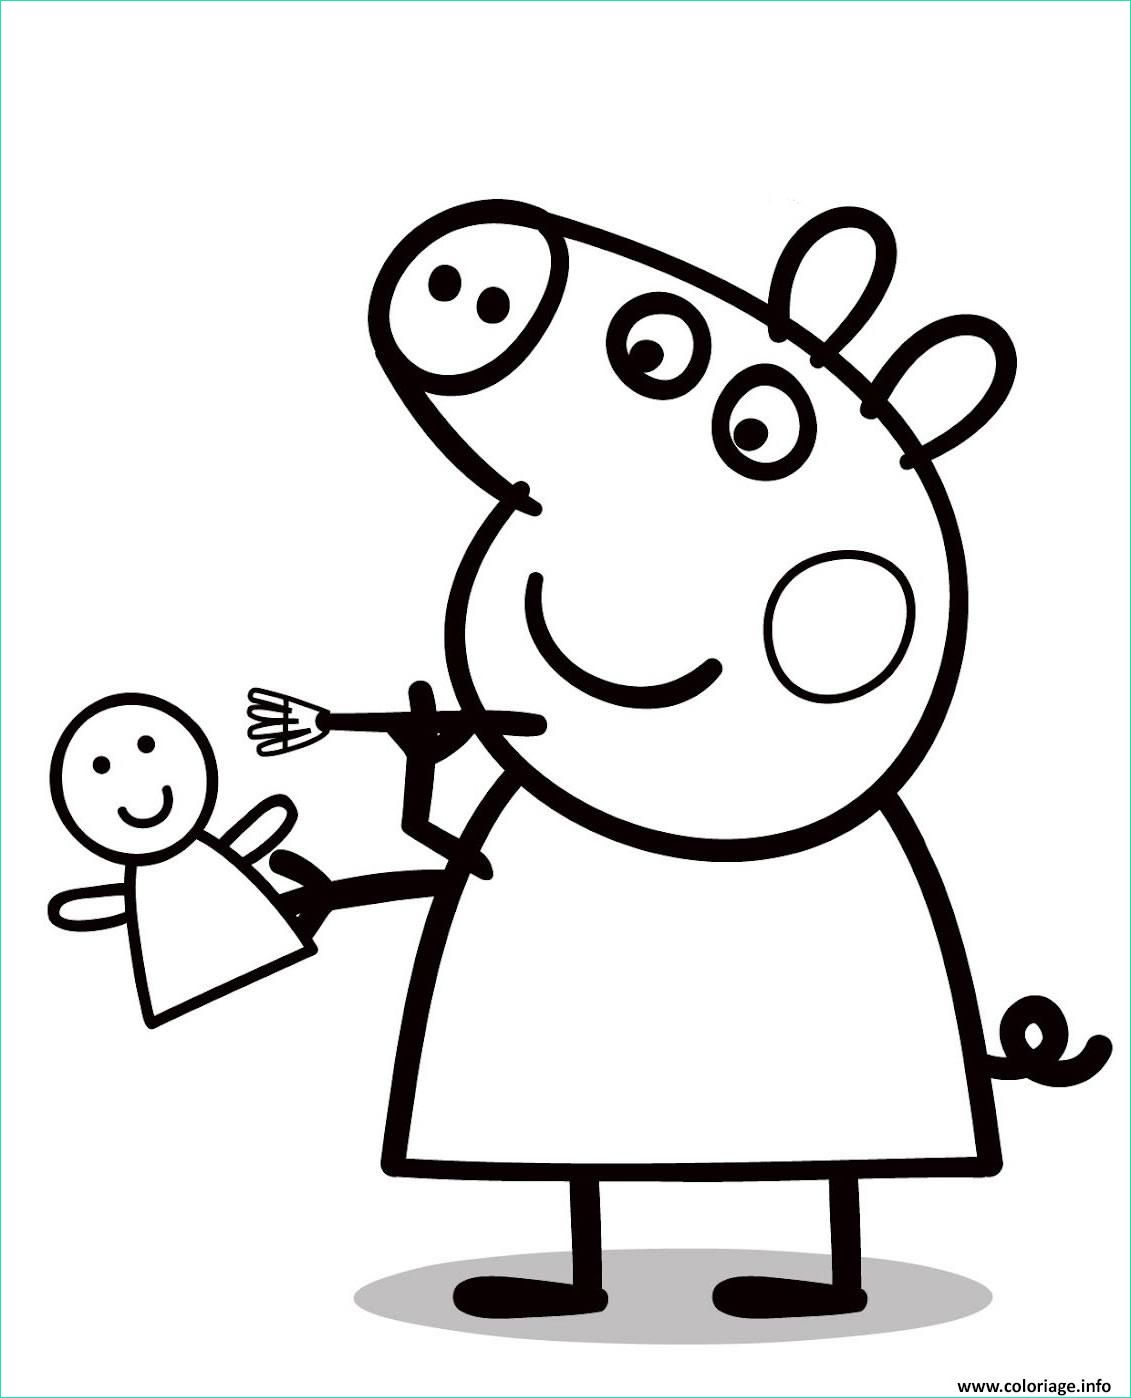 dessin peppa pig cool image coloriage peppa pig 69 jecolorie